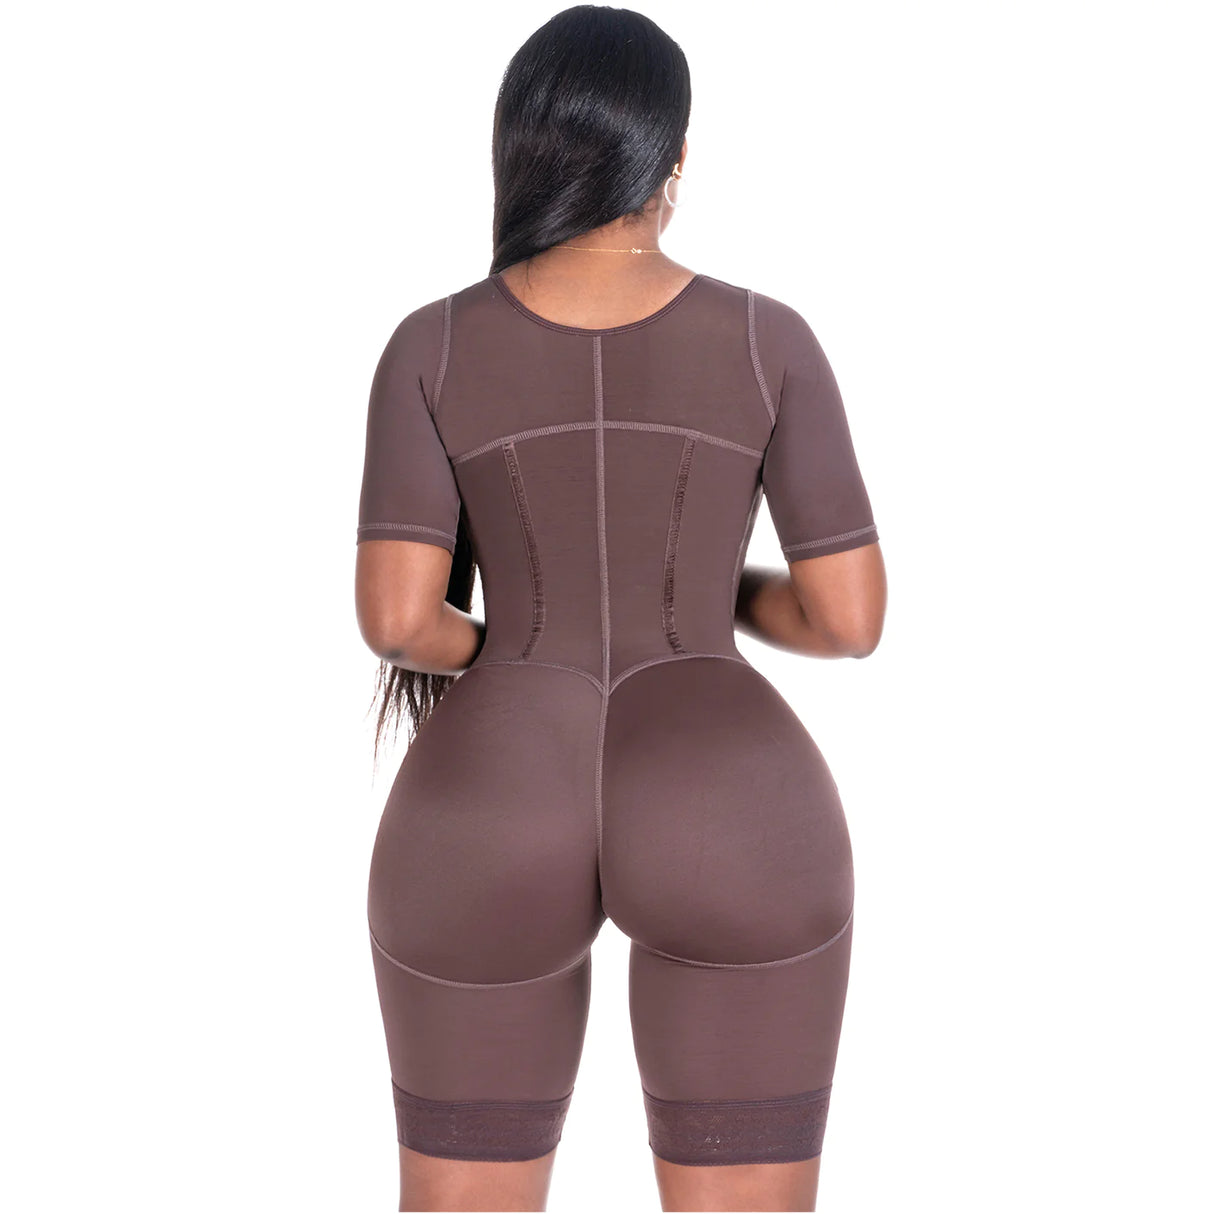 Special Compression Garment For Small Waist And Wide Hips “BBL